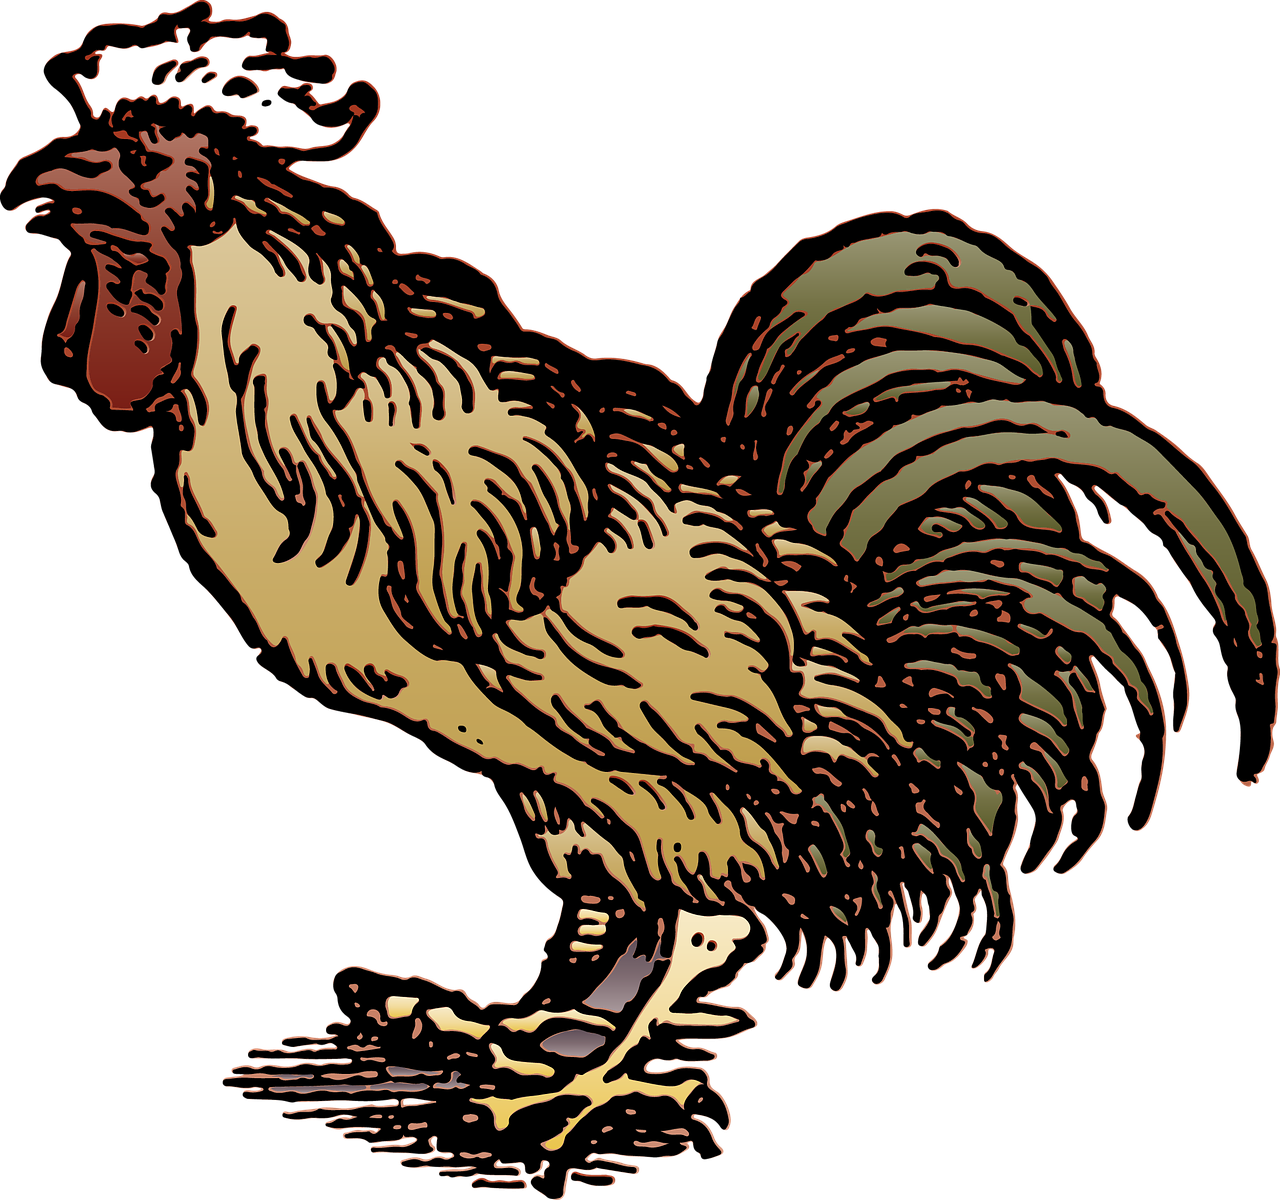 hen clipart life cycle chicken